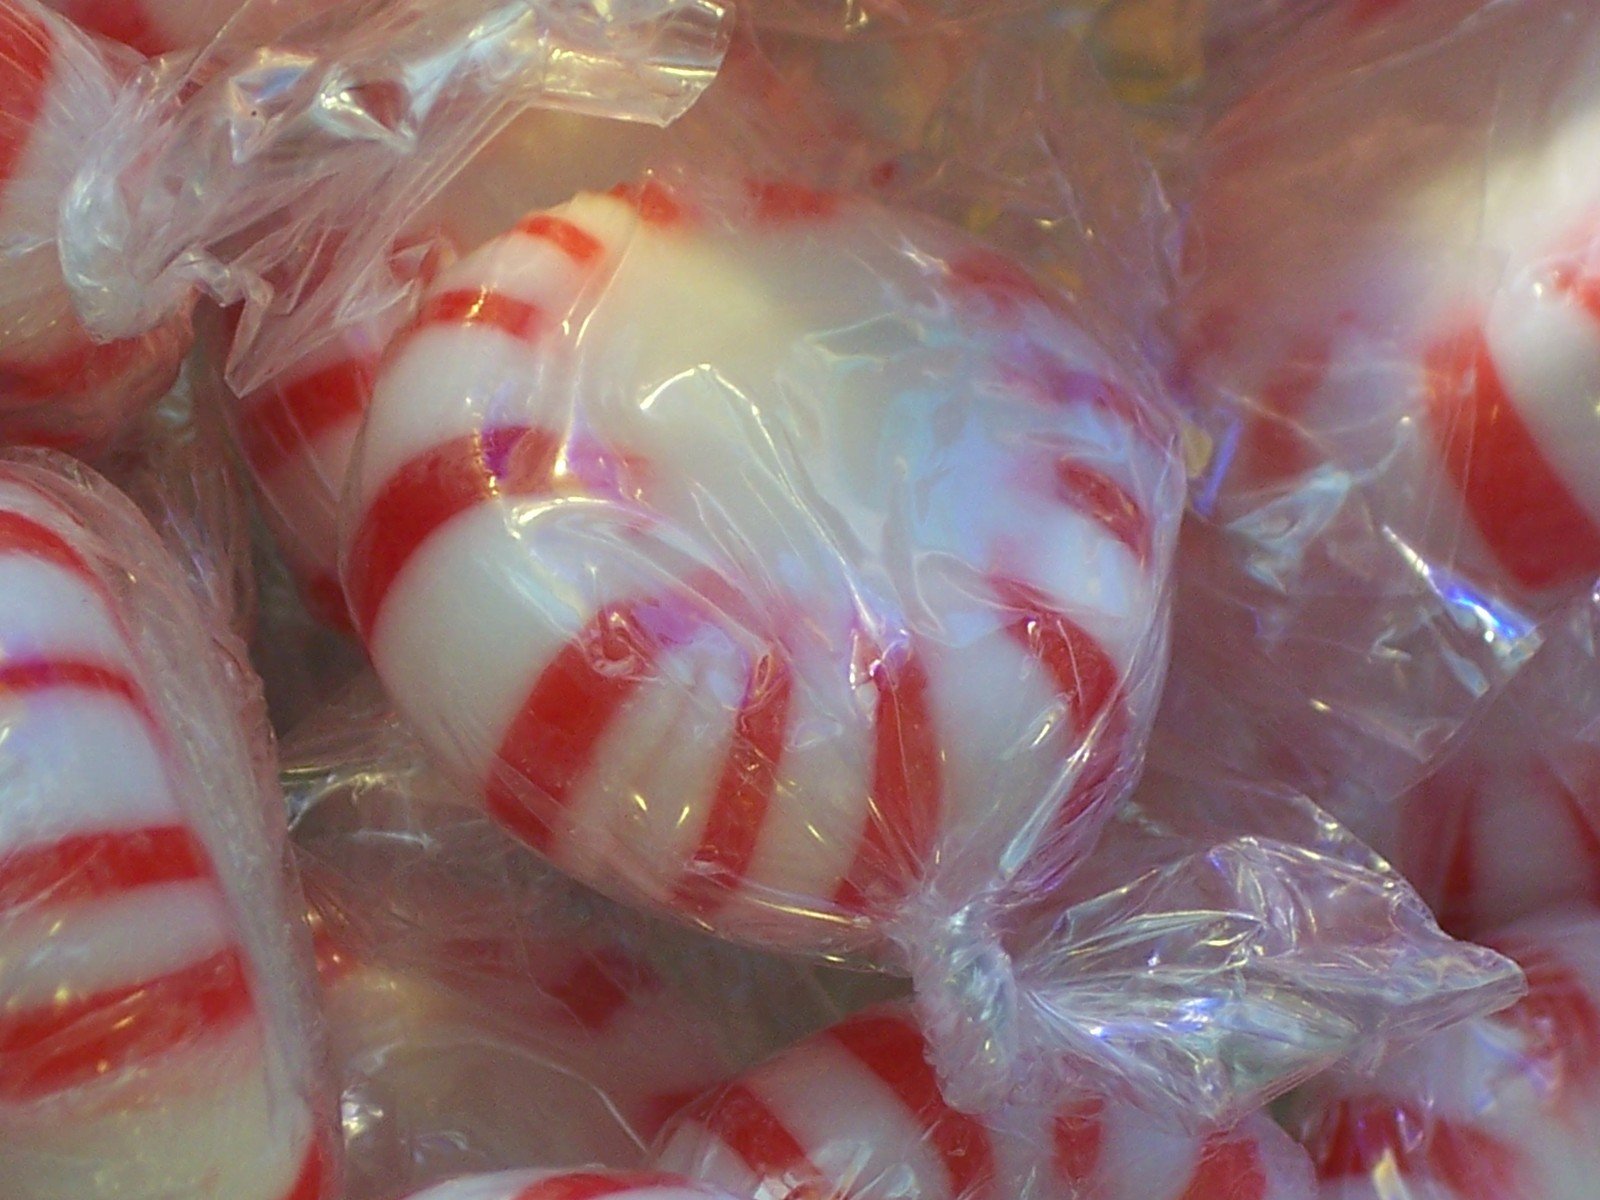 several red and white lollipops wrapped in plastic